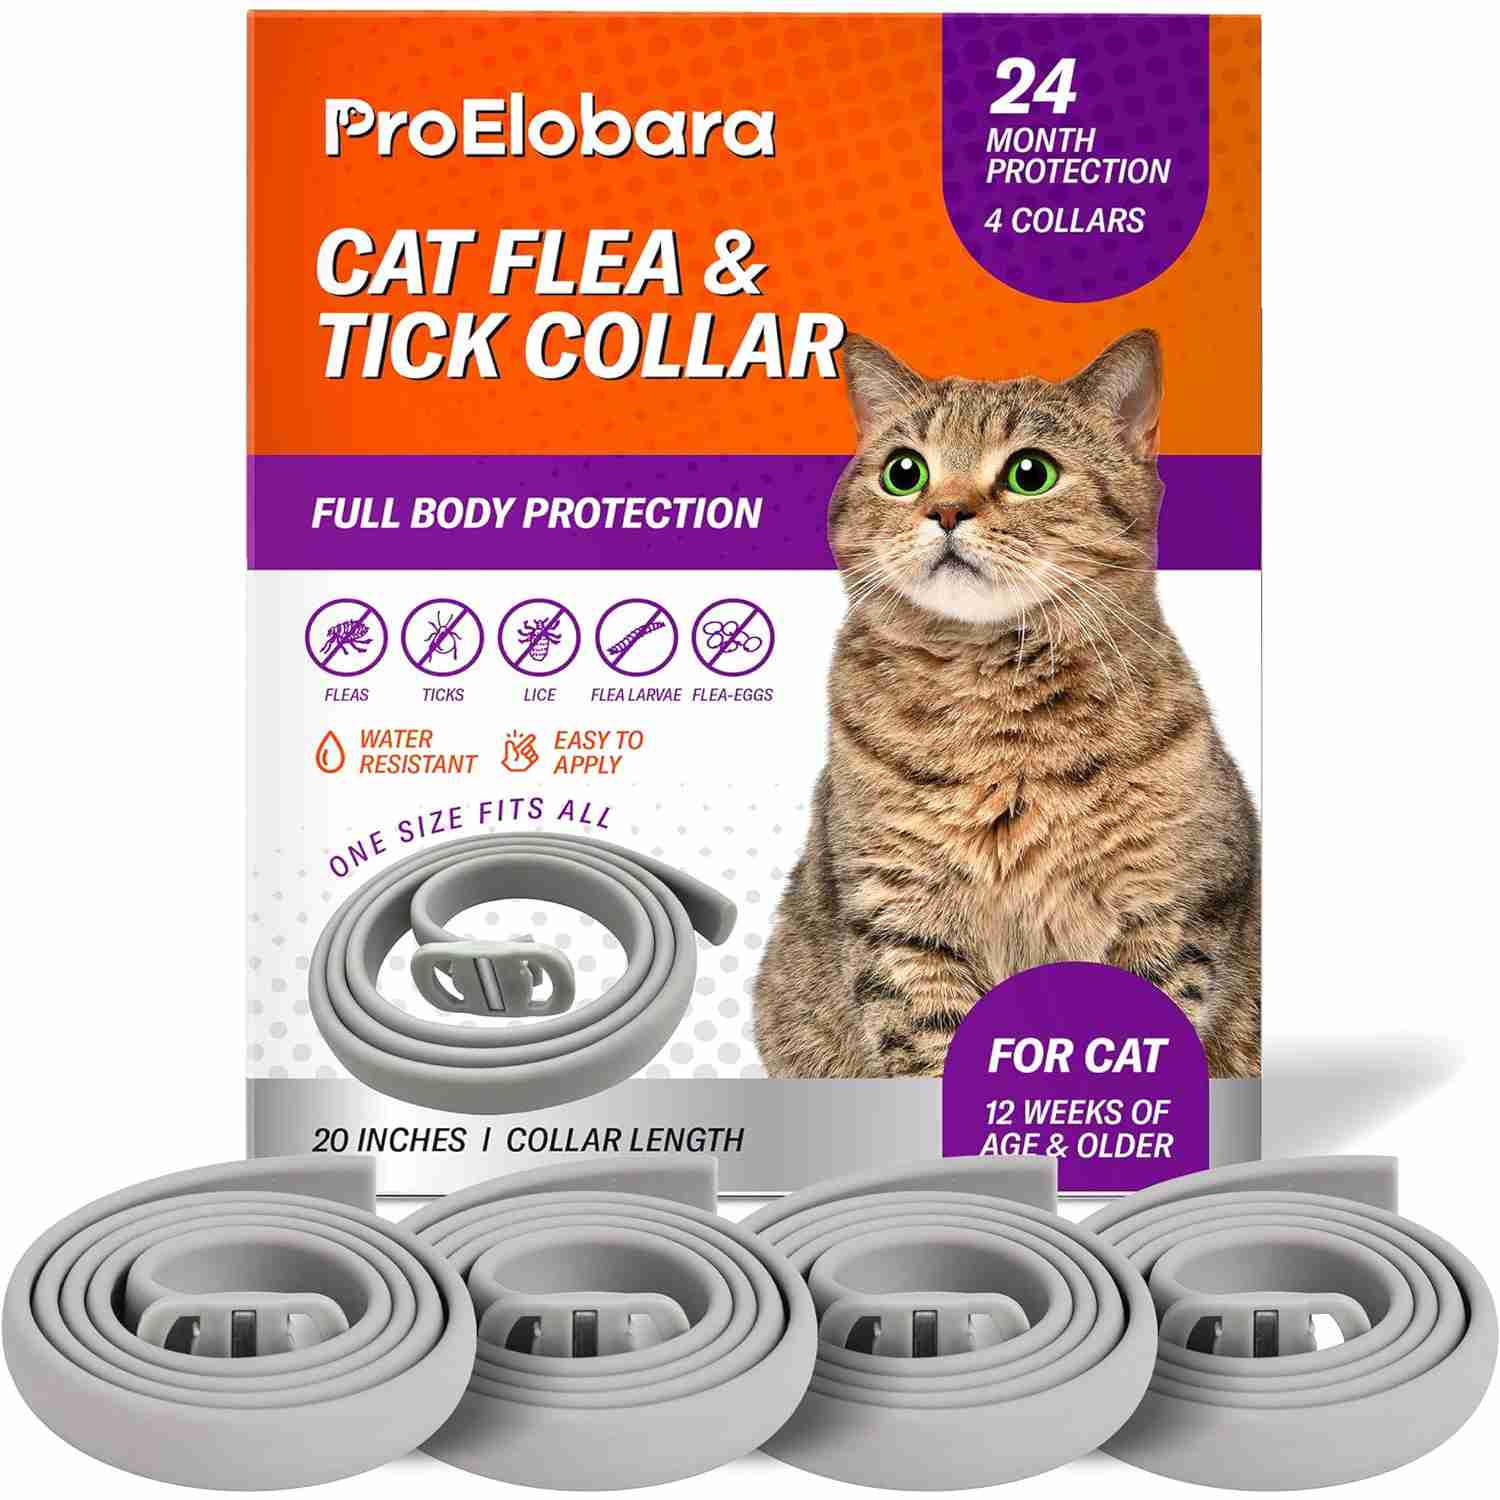 flea-and-tick-prevention-for-kittens with cash back rebate